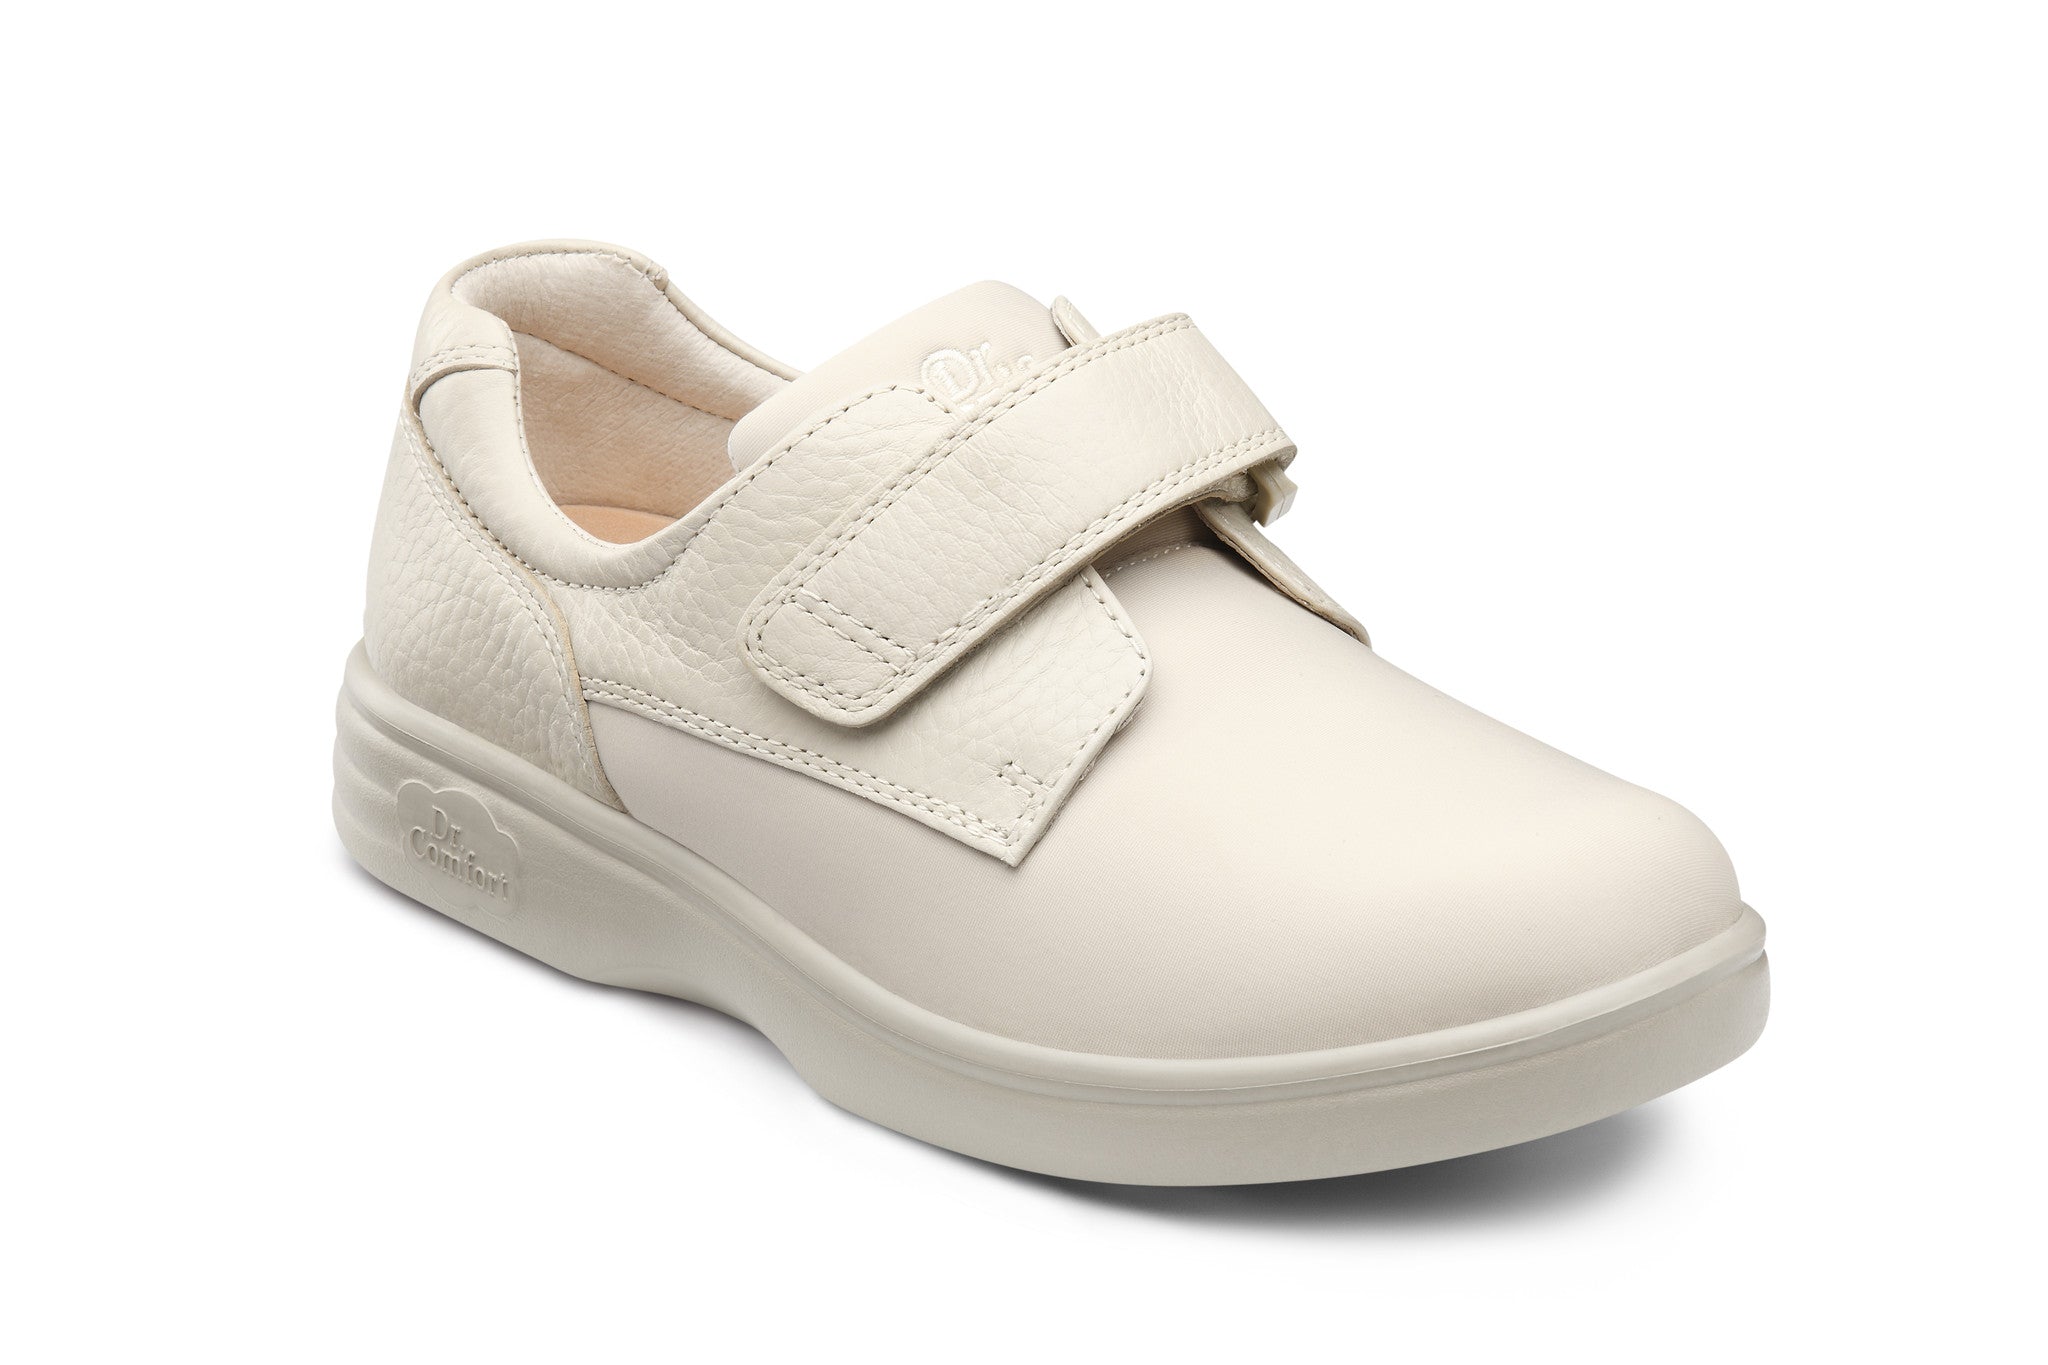 velcro support shoes